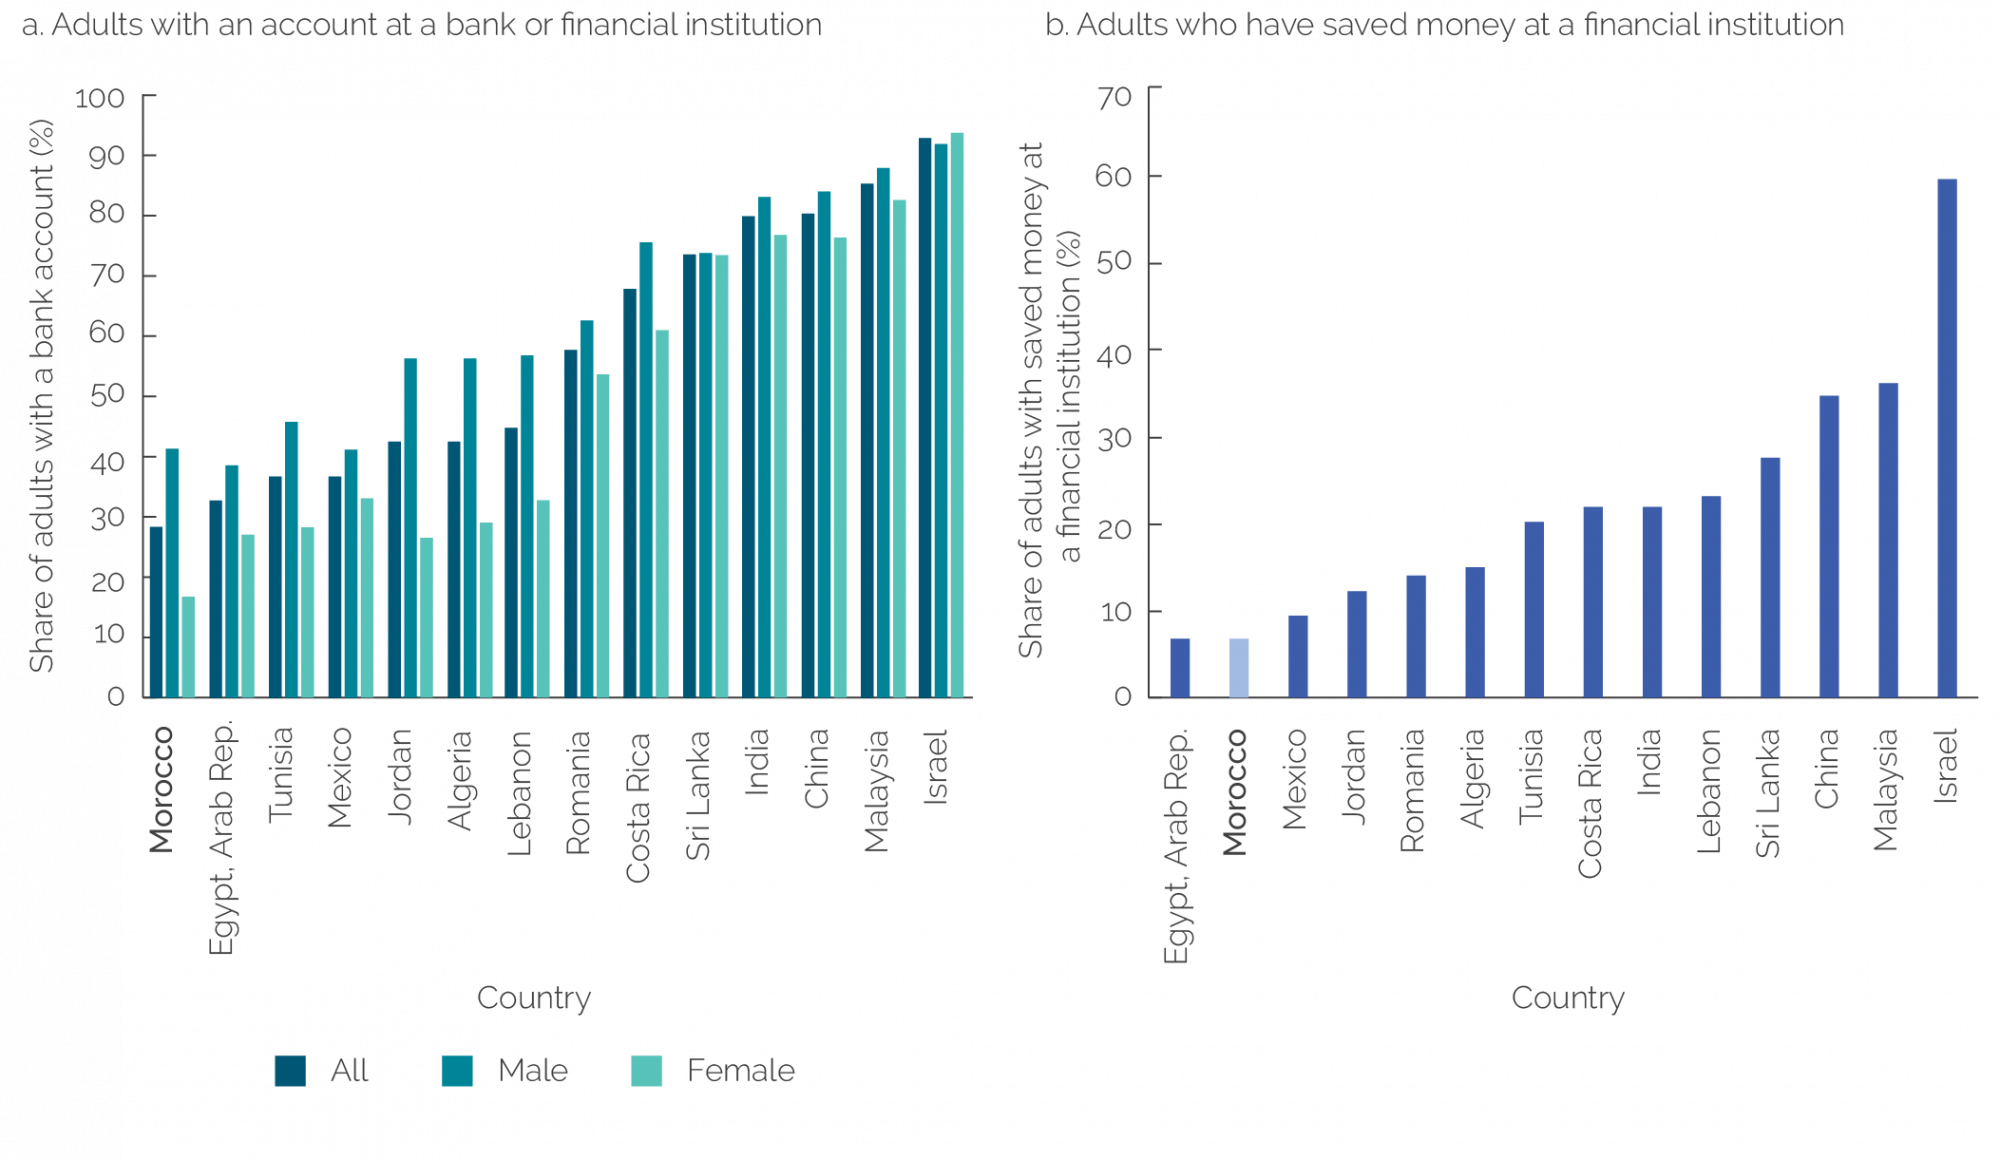 Panel a.
Bar chart showing that Morocco has the lowest share of adults with an account at a bank or financial institution.
Panel b.
Bar chart showing low share of adults saving money at a financial institution in Morocco compared with comparator countries.
